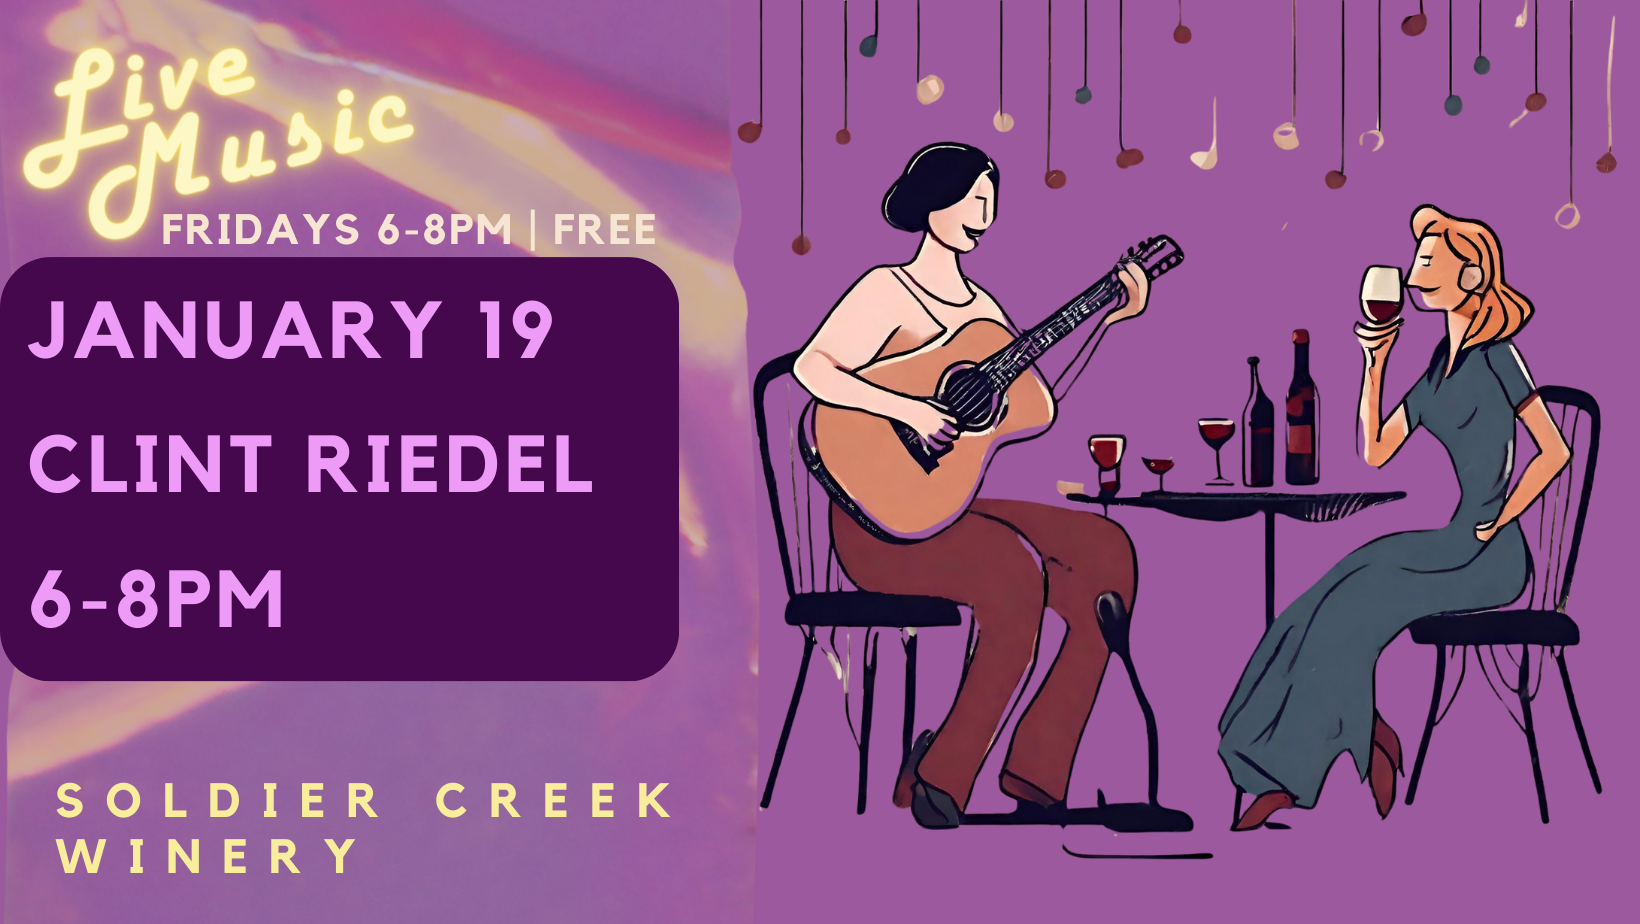 free, live music every friday at soldier creek winery. january 19 is clint riedel from 6-8pm. free to listen.